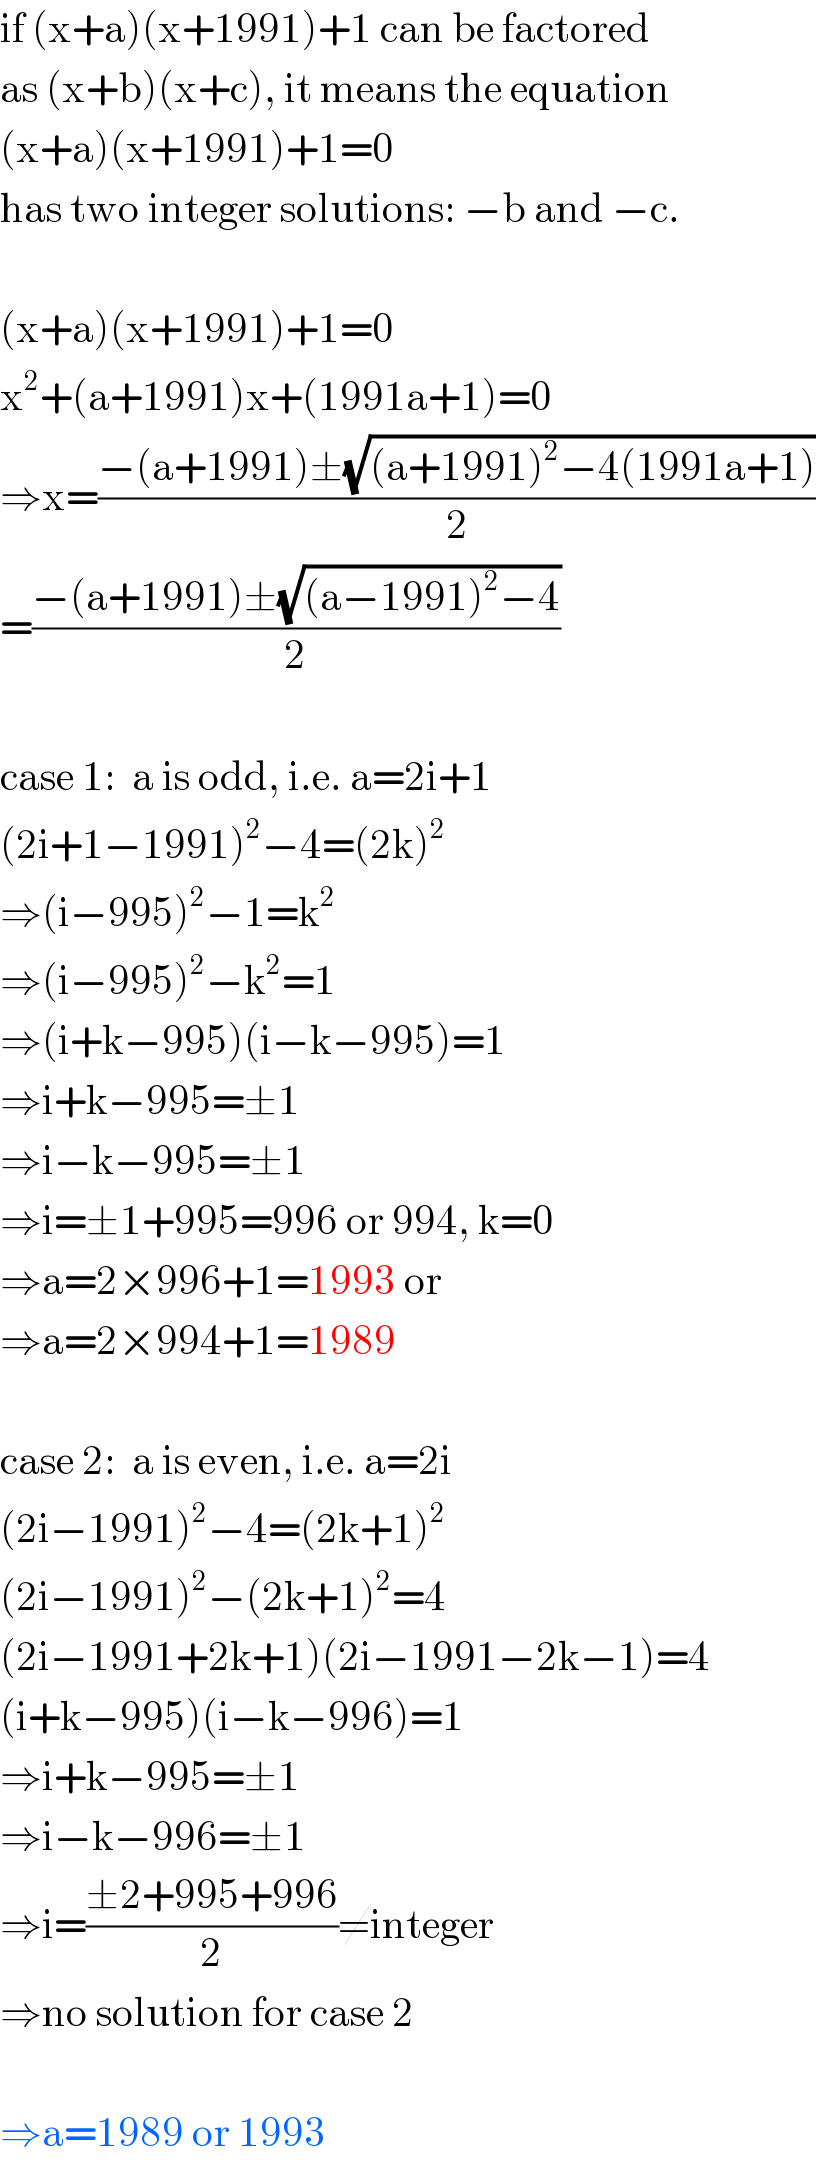 if (x+a)(x+1991)+1 can be factored  as (x+b)(x+c), it means the equation  (x+a)(x+1991)+1=0   has two integer solutions: −b and −c.    (x+a)(x+1991)+1=0  x^2 +(a+1991)x+(1991a+1)=0  ⇒x=((−(a+1991)±(√((a+1991)^2 −4(1991a+1))))/2)  =((−(a+1991)±(√((a−1991)^2 −4)))/2)    case 1:  a is odd, i.e. a=2i+1  (2i+1−1991)^2 −4=(2k)^2   ⇒(i−995)^2 −1=k^2   ⇒(i−995)^2 −k^2 =1  ⇒(i+k−995)(i−k−995)=1  ⇒i+k−995=±1  ⇒i−k−995=±1  ⇒i=±1+995=996 or 994, k=0  ⇒a=2×996+1=1993 or  ⇒a=2×994+1=1989     case 2:  a is even, i.e. a=2i  (2i−1991)^2 −4=(2k+1)^2   (2i−1991)^2 −(2k+1)^2 =4  (2i−1991+2k+1)(2i−1991−2k−1)=4  (i+k−995)(i−k−996)=1  ⇒i+k−995=±1  ⇒i−k−996=±1  ⇒i=((±2+995+996)/2)≠integer  ⇒no solution for case 2    ⇒a=1989 or 1993  